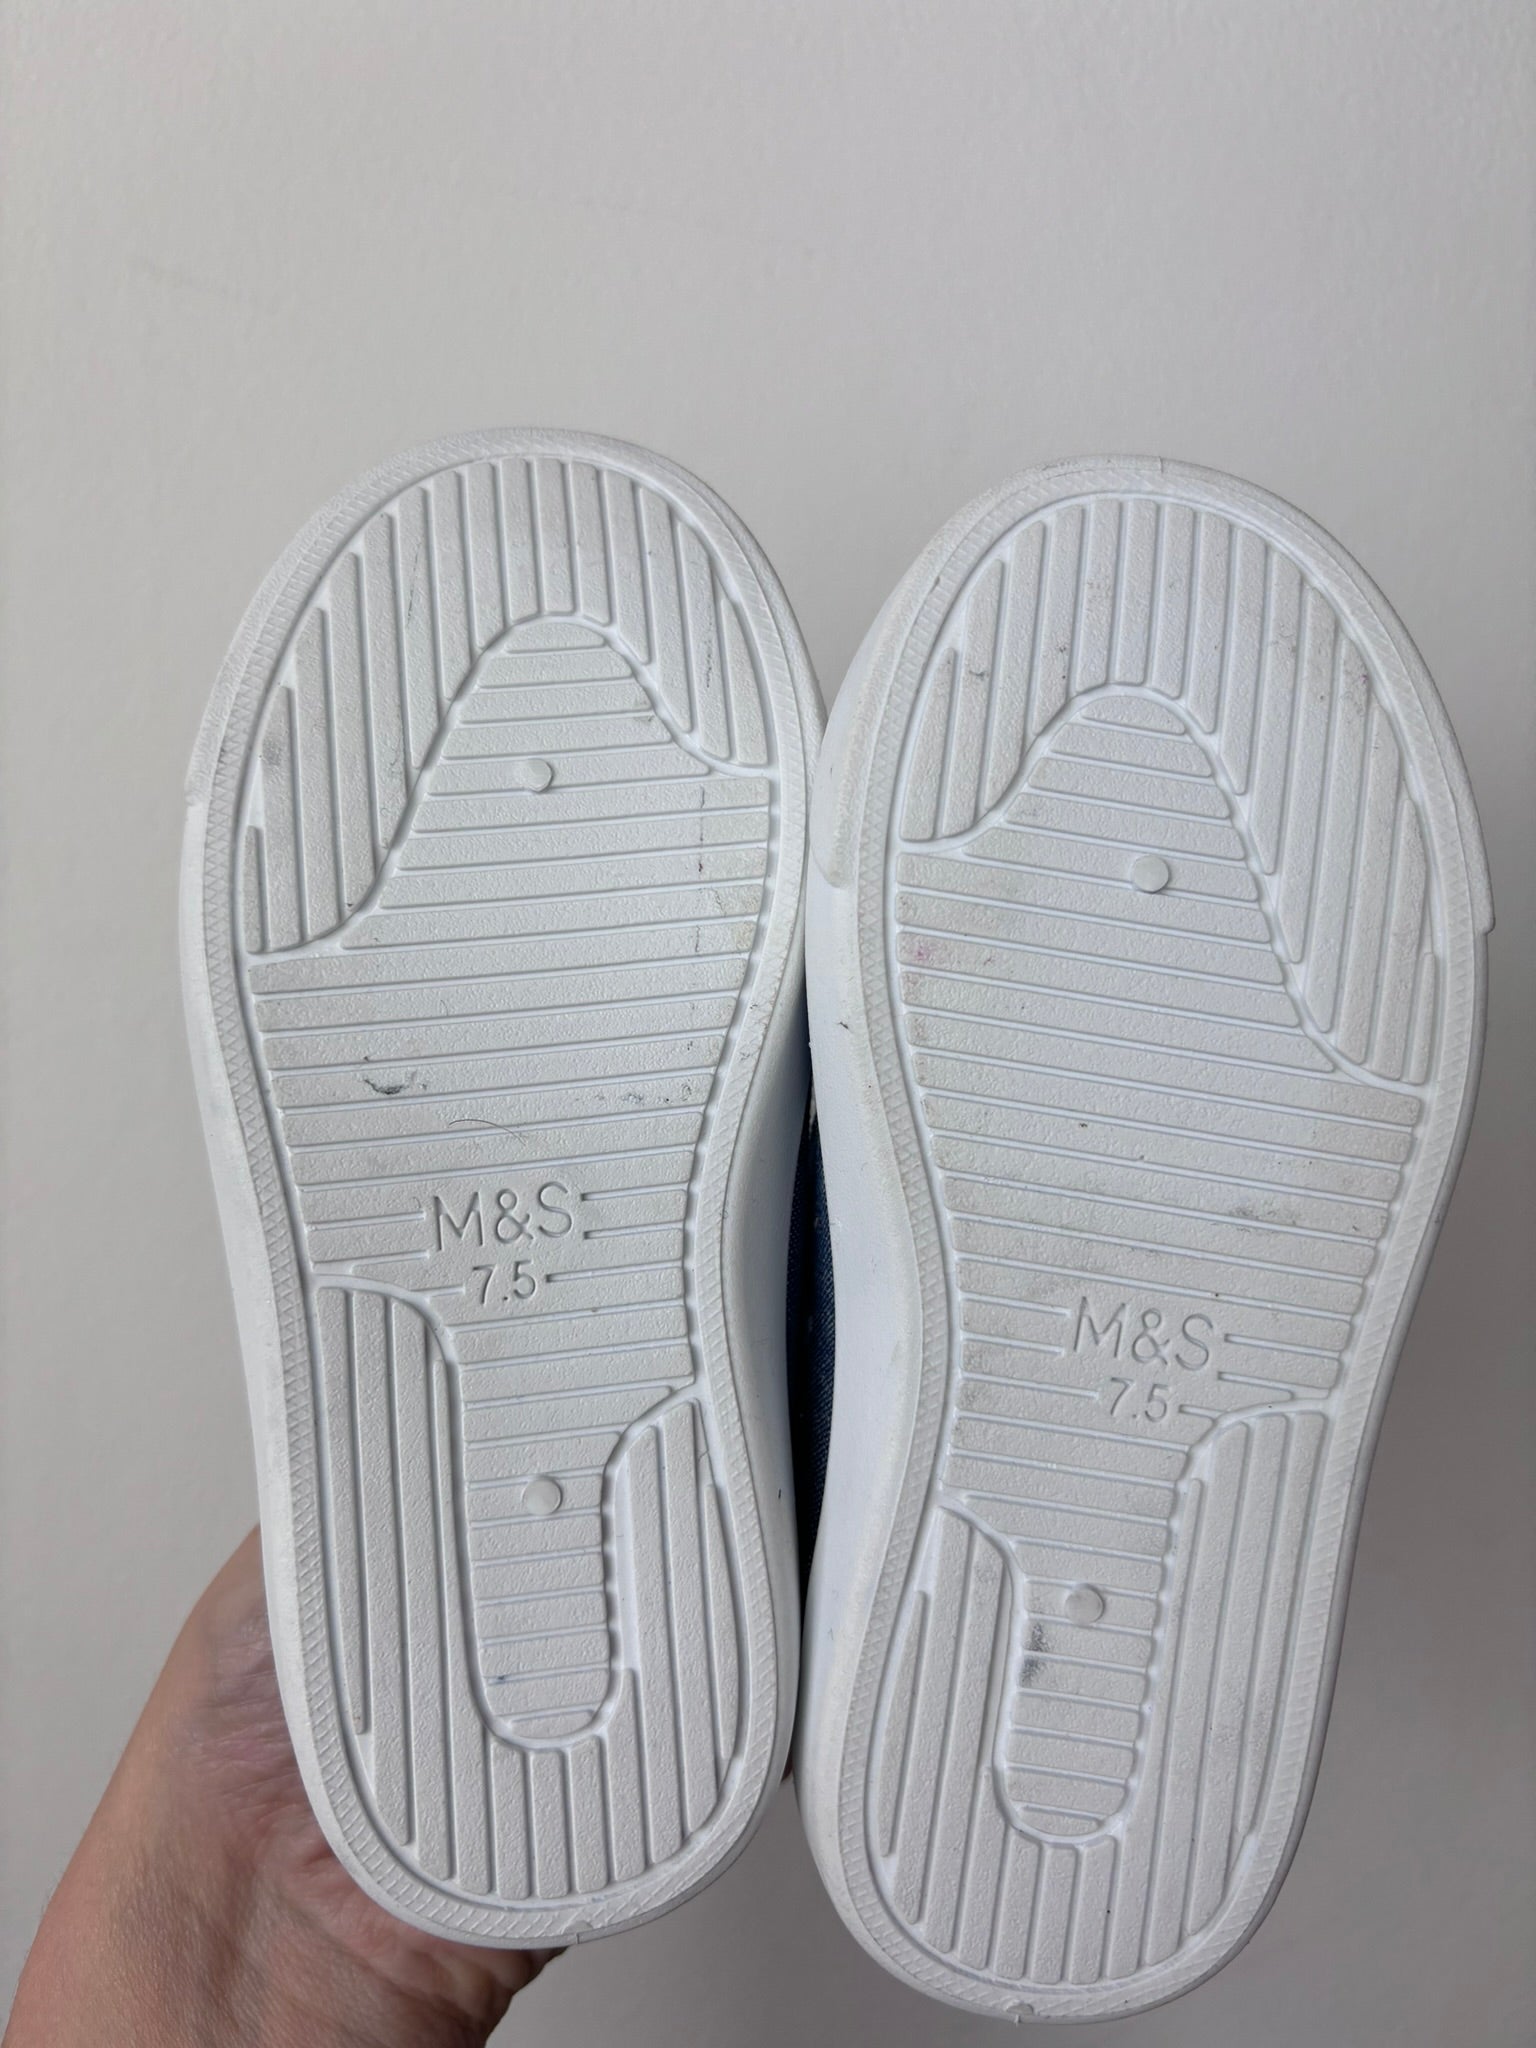 M&S UK 7.5-Shoes-Second Snuggle Preloved